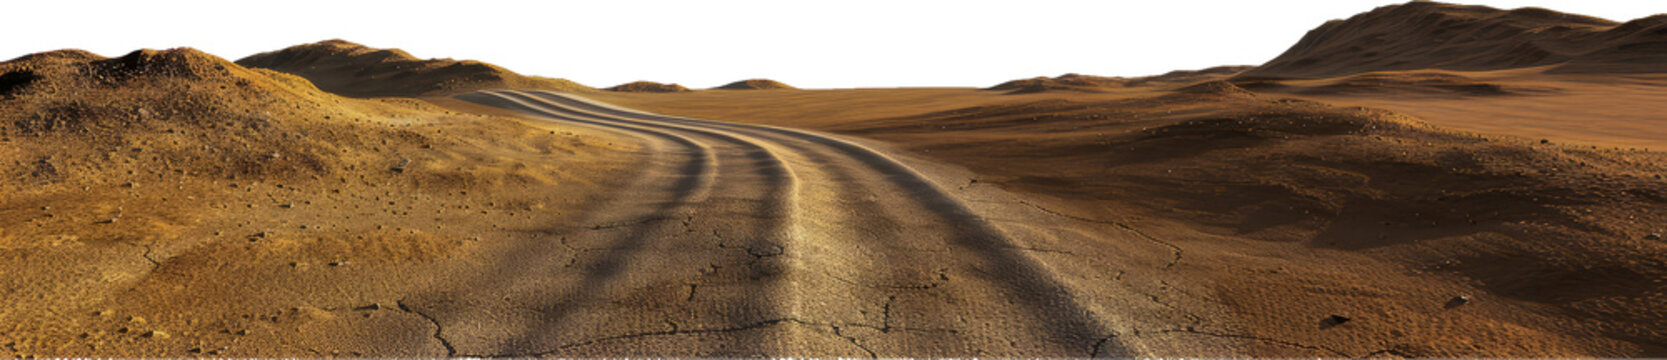 Desert road cutting through sand dunes cut out on transparent background